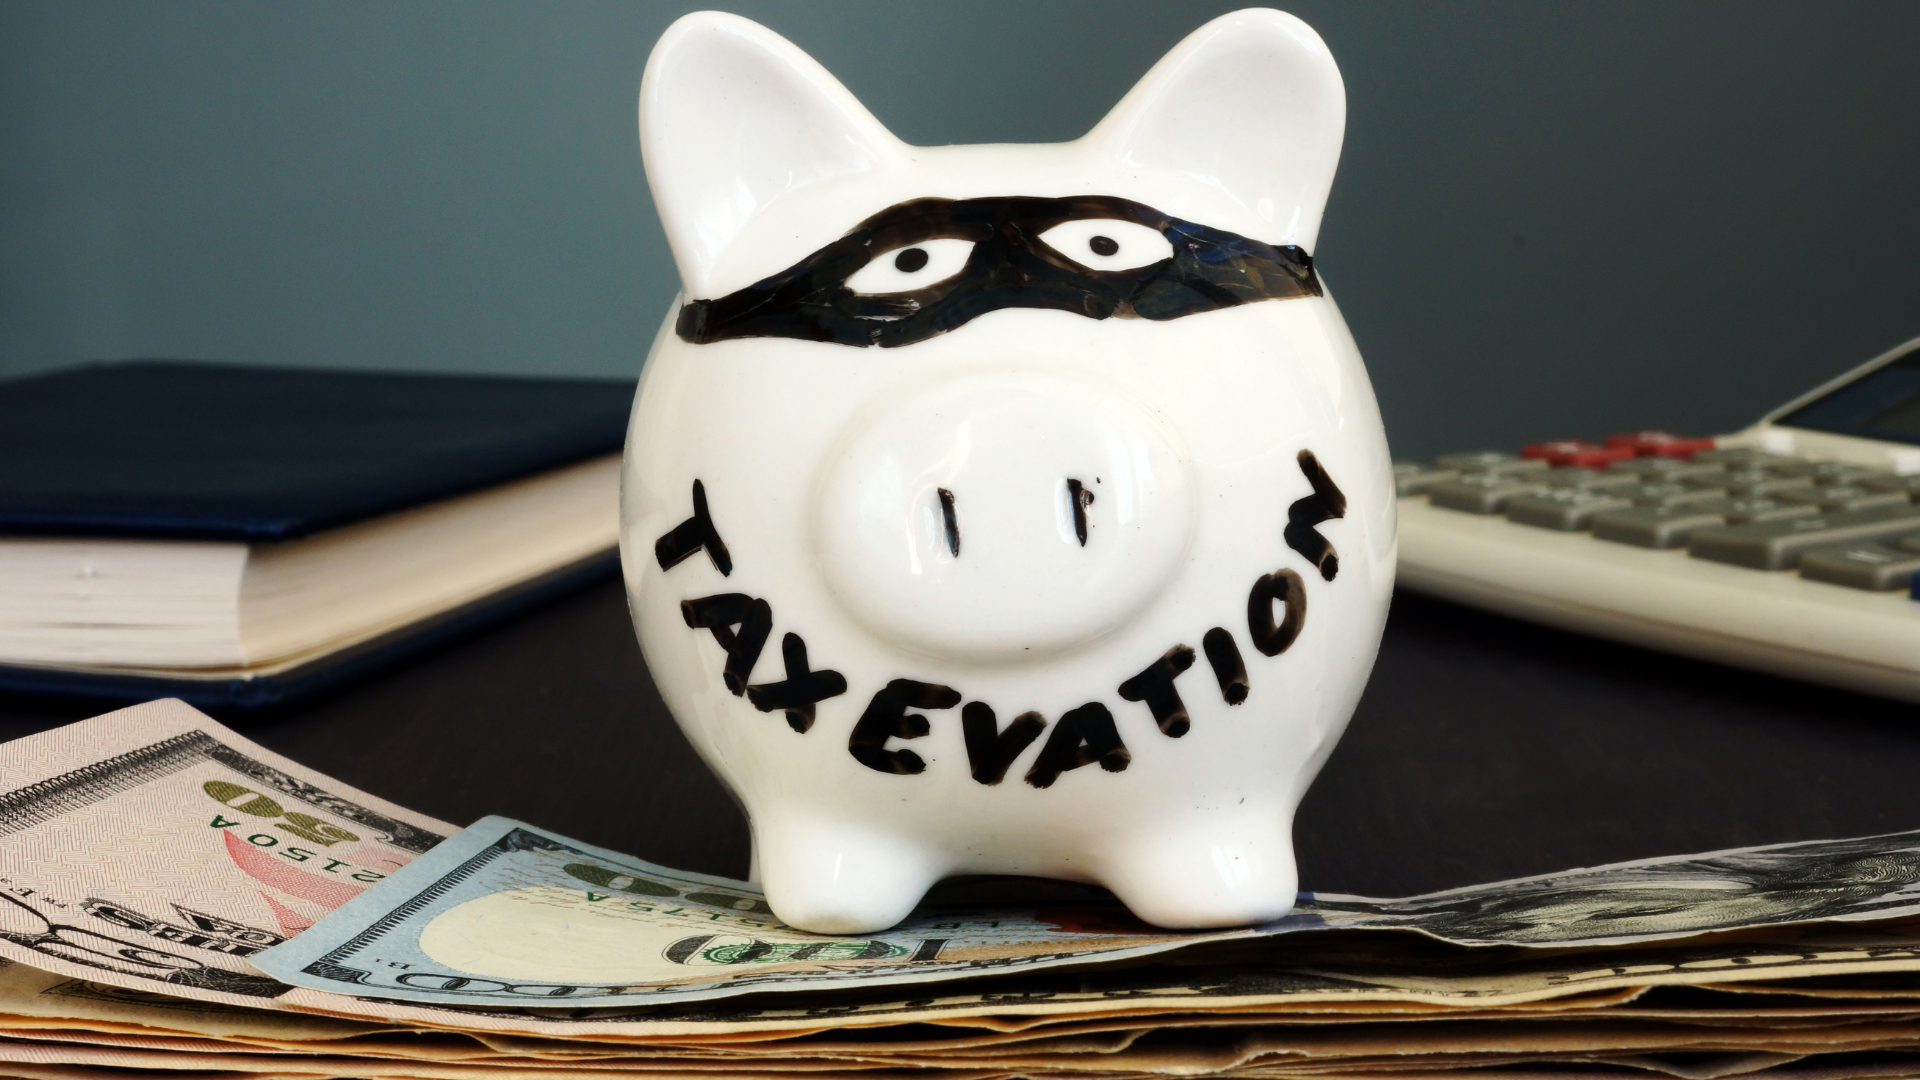 Piggy bank with "Tax Evasion" word written on it